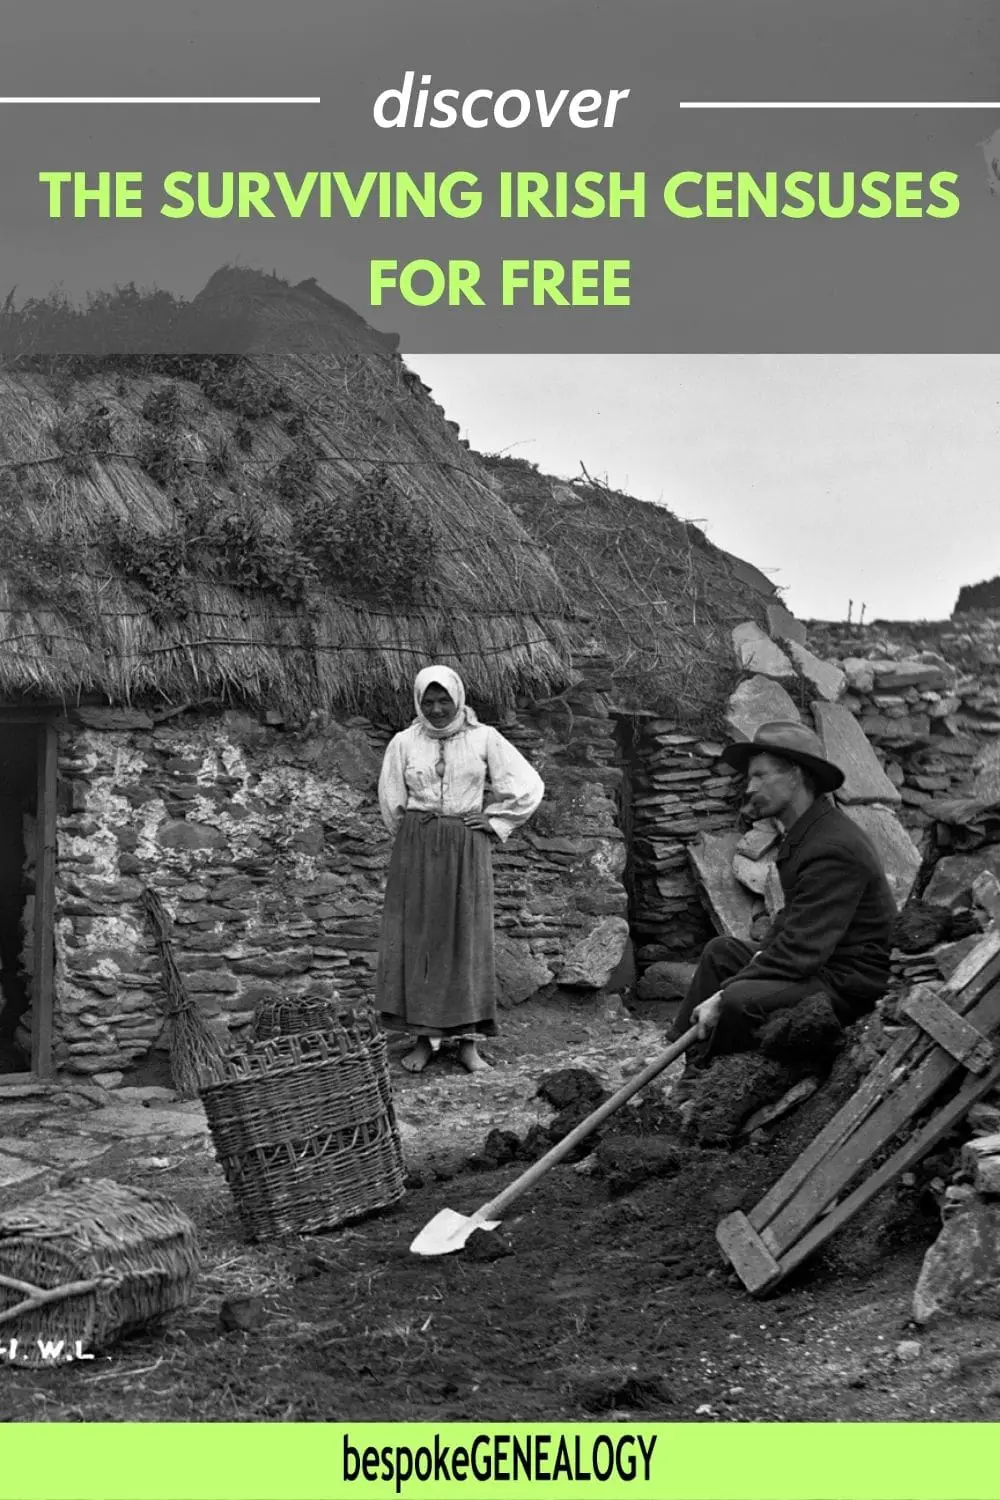 Discover the surviving Irish censuses for free. 19th century photo of a poor Irish family outside their dilapidated cottage